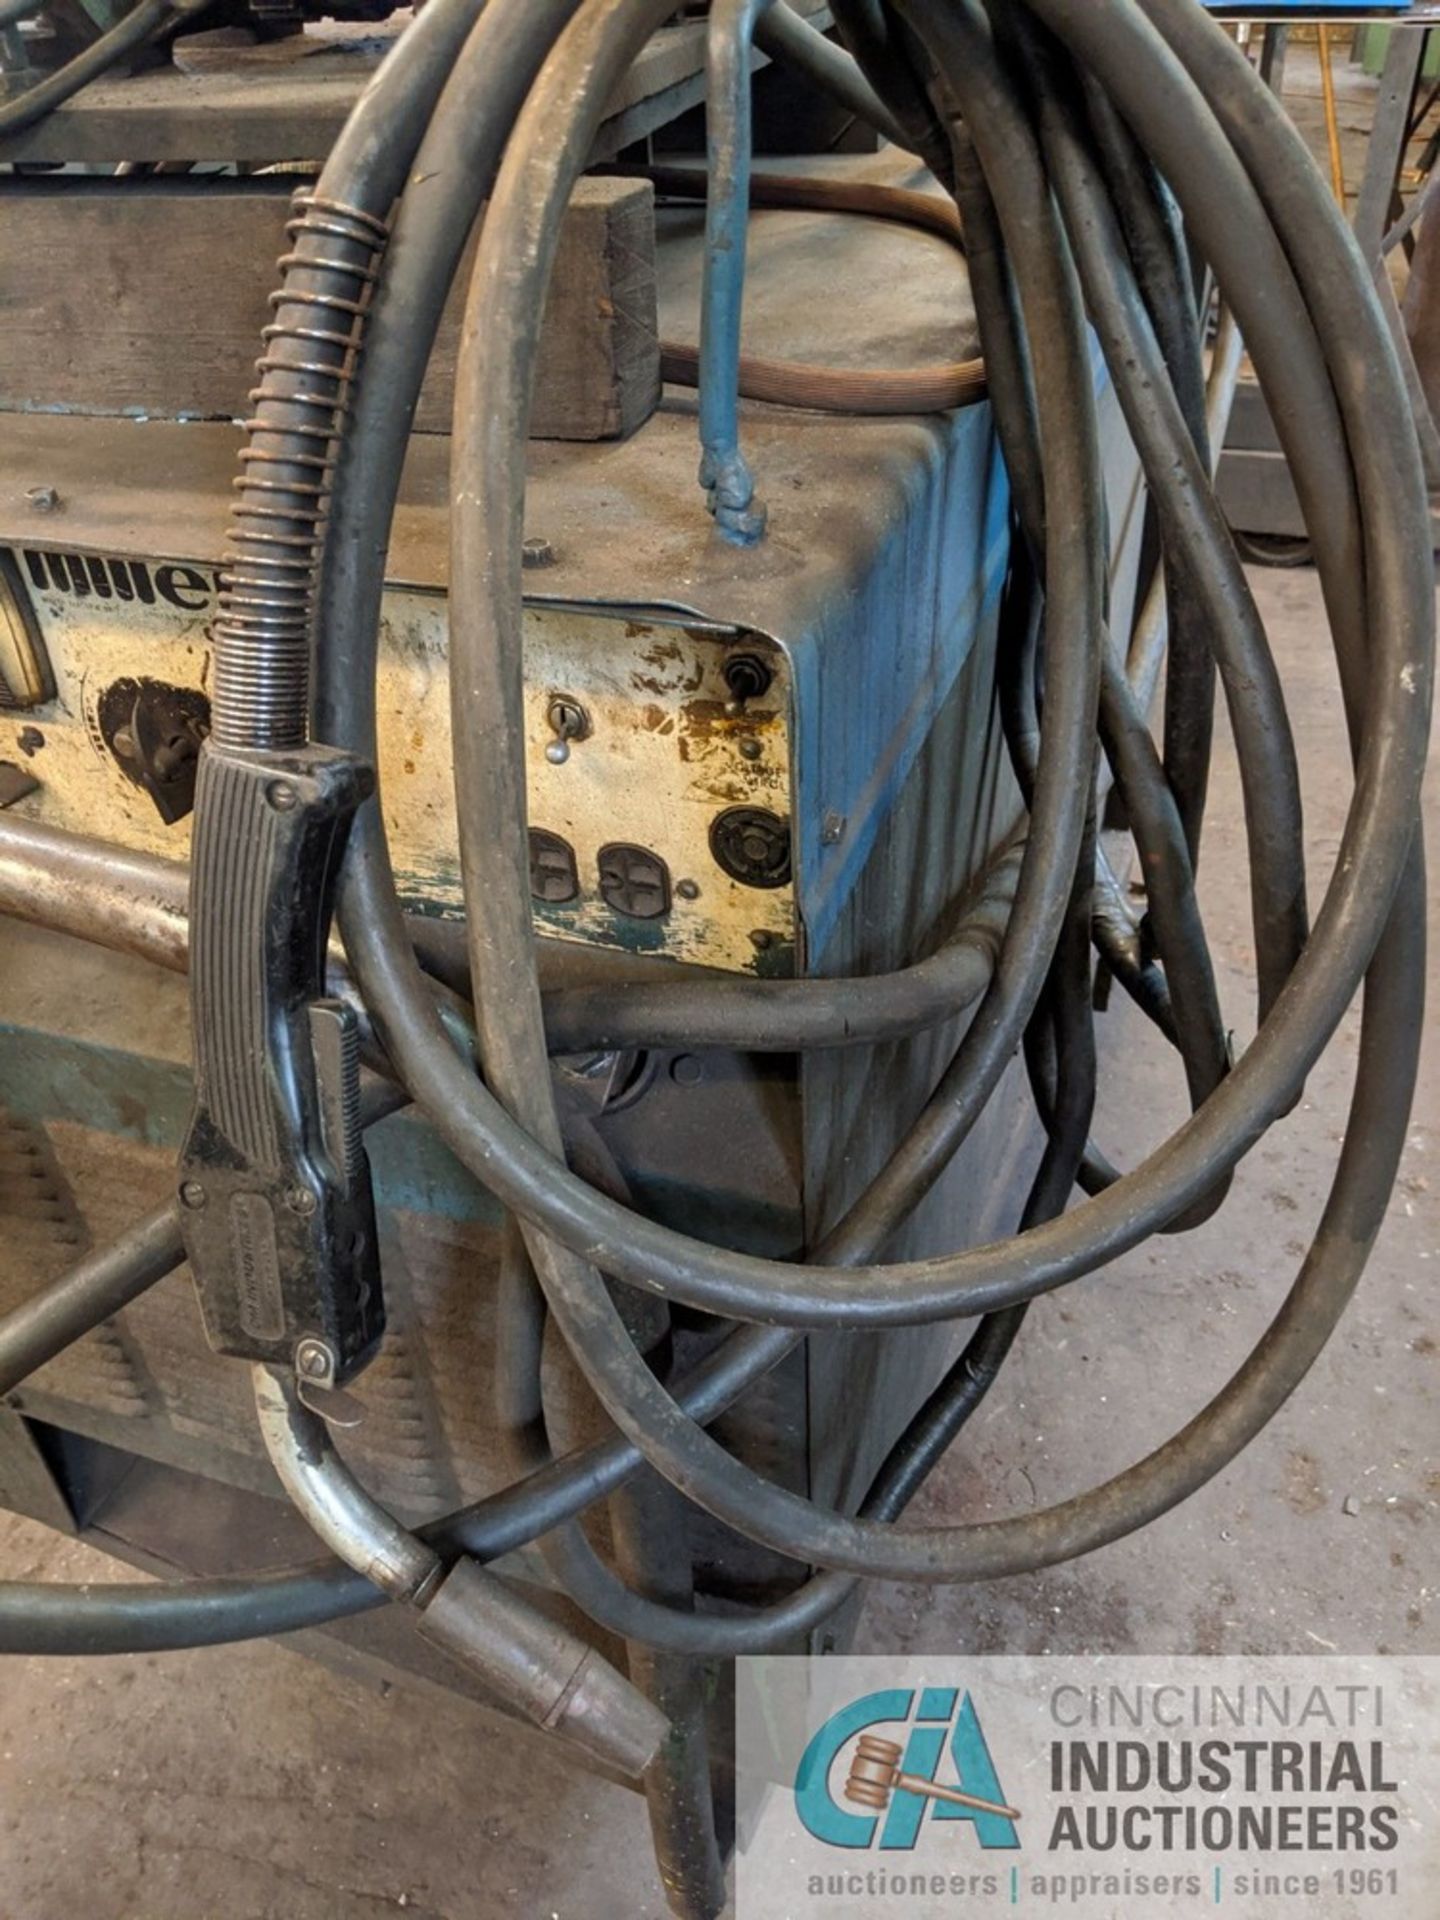 600 AMP MILLER MP65 MIG WELDER WITH 30 A WIRE FEED - Image 4 of 4